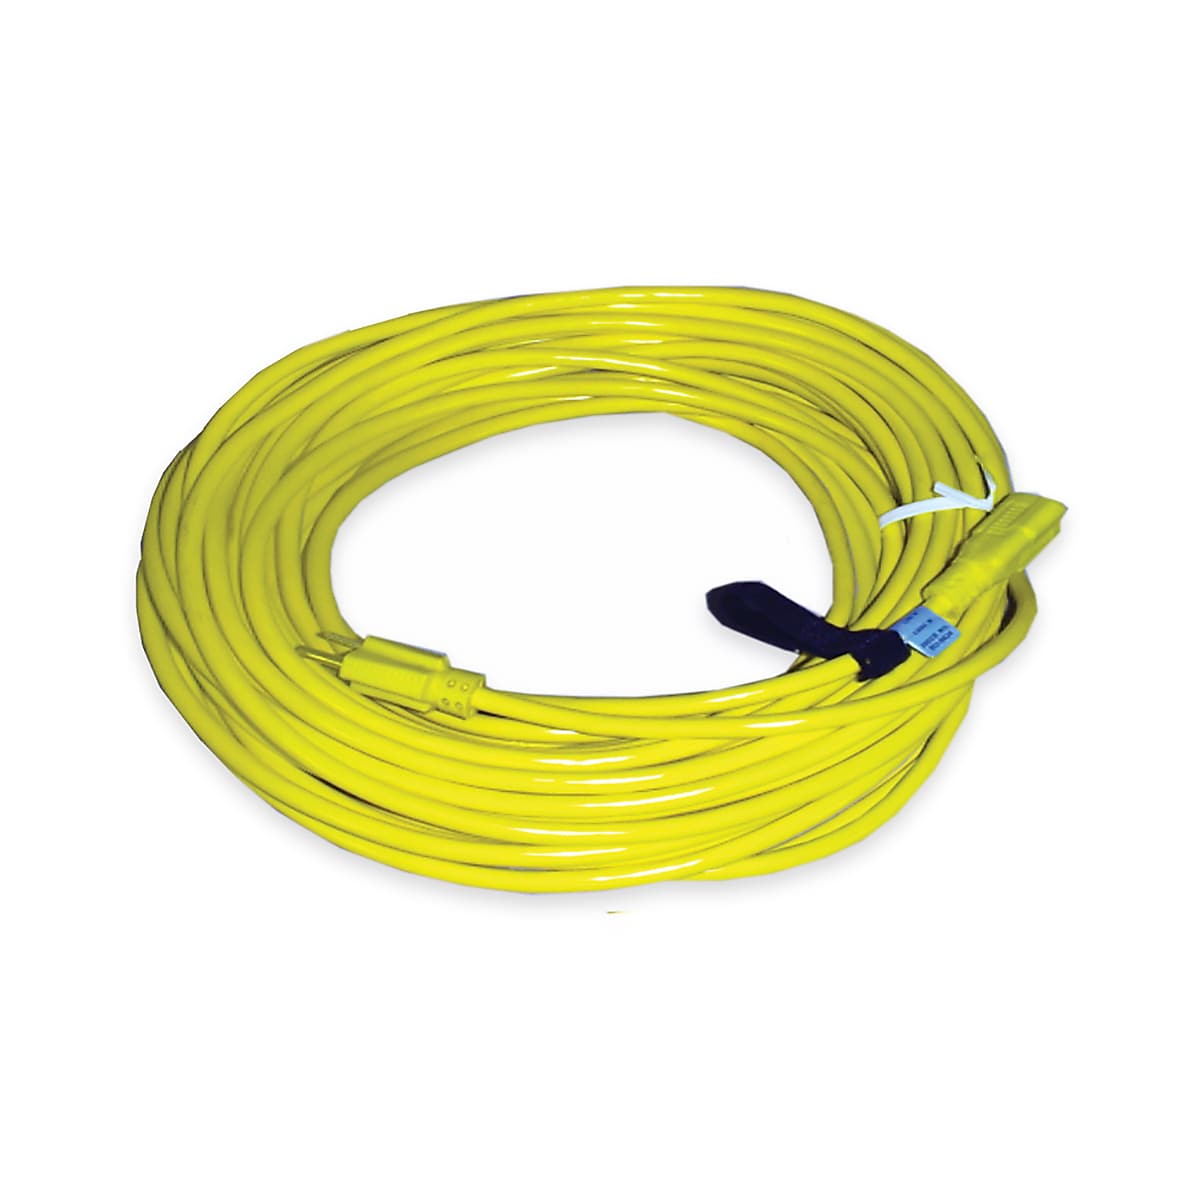 ProTeam 16 Gauge 50' Extension Cord, Yellow